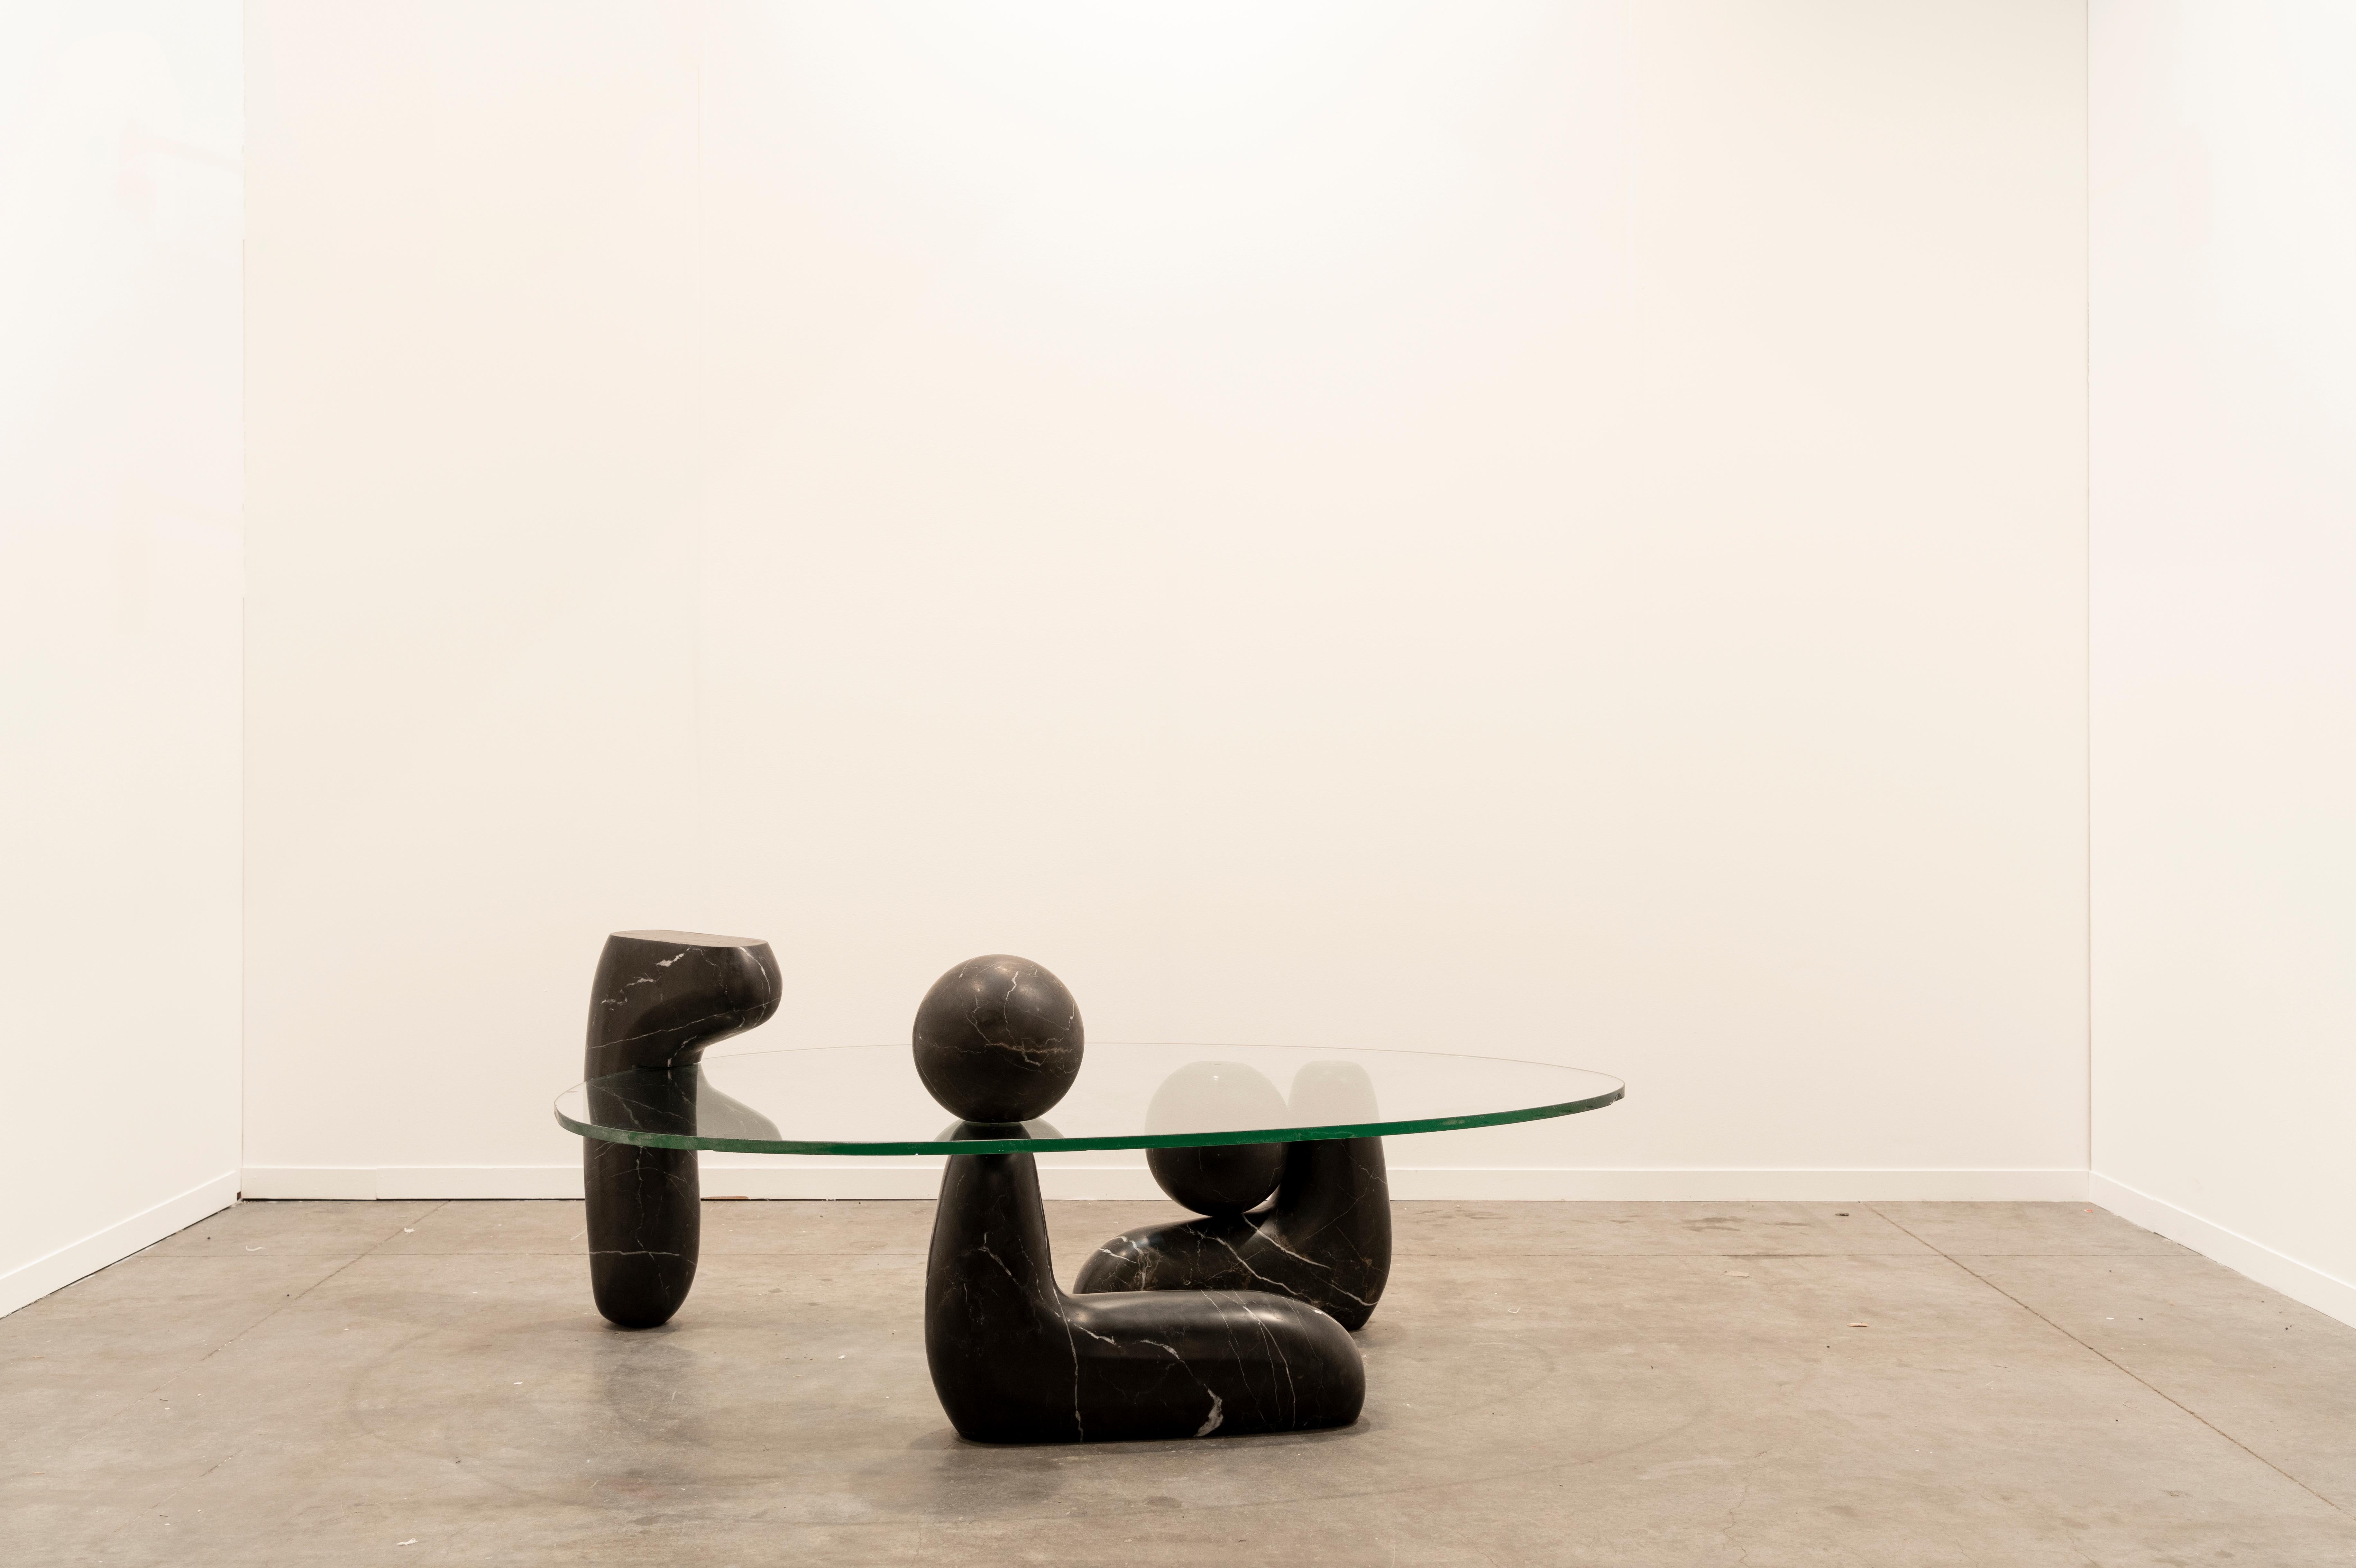 I. ABOUT REBECA CORS
Rebeca Cors (México, 1988). 
Her work oscillates between sculpture and utility object, studying the limits and meeting points between these two concepts.? The intention of her work is to question paradigms in order to